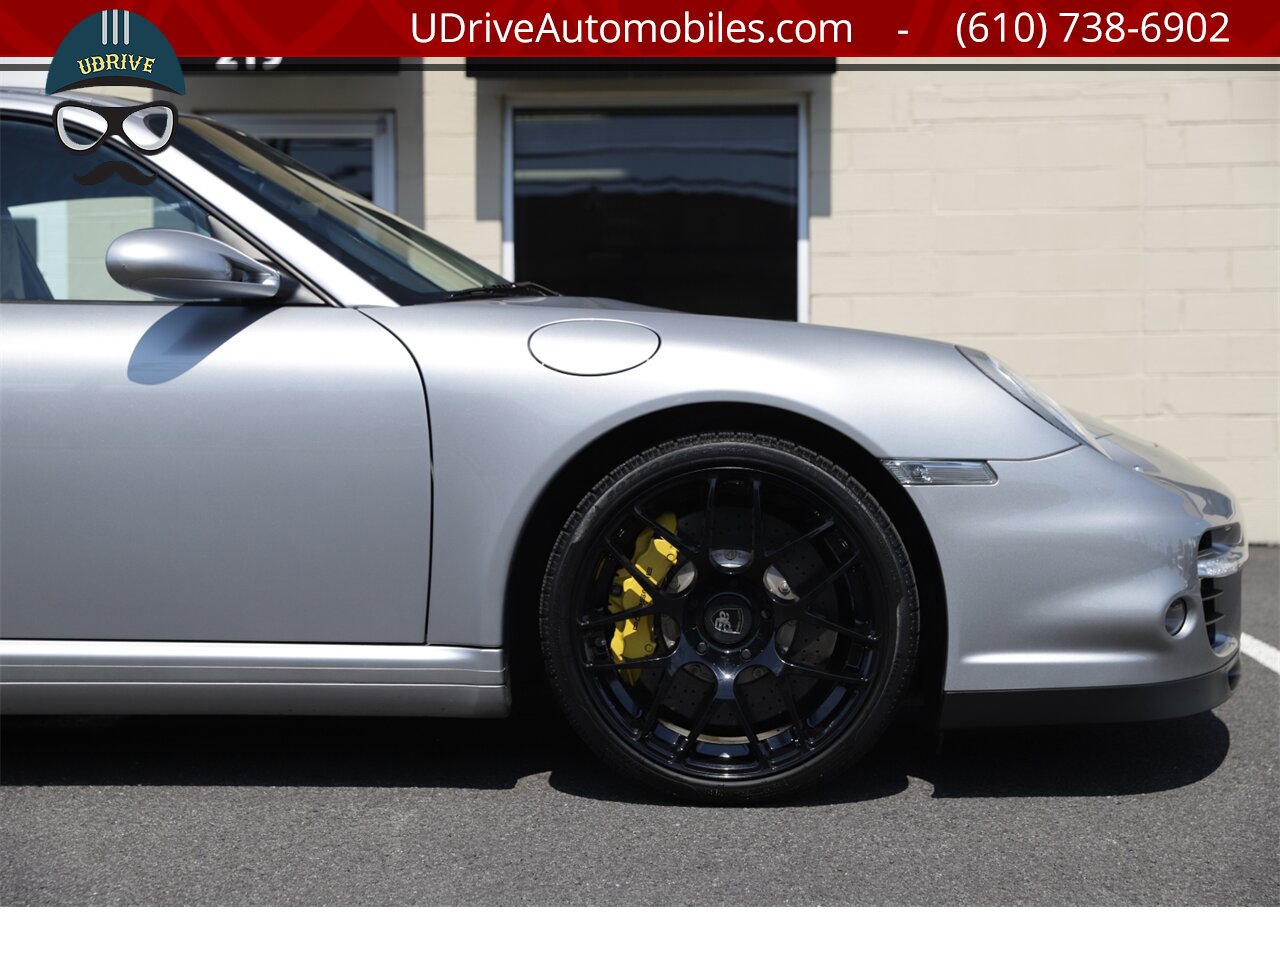 2008 Porsche 911 6 Speed Manual Turbo 997 PCCB's $149k MSRP   - Photo 15 - West Chester, PA 19382